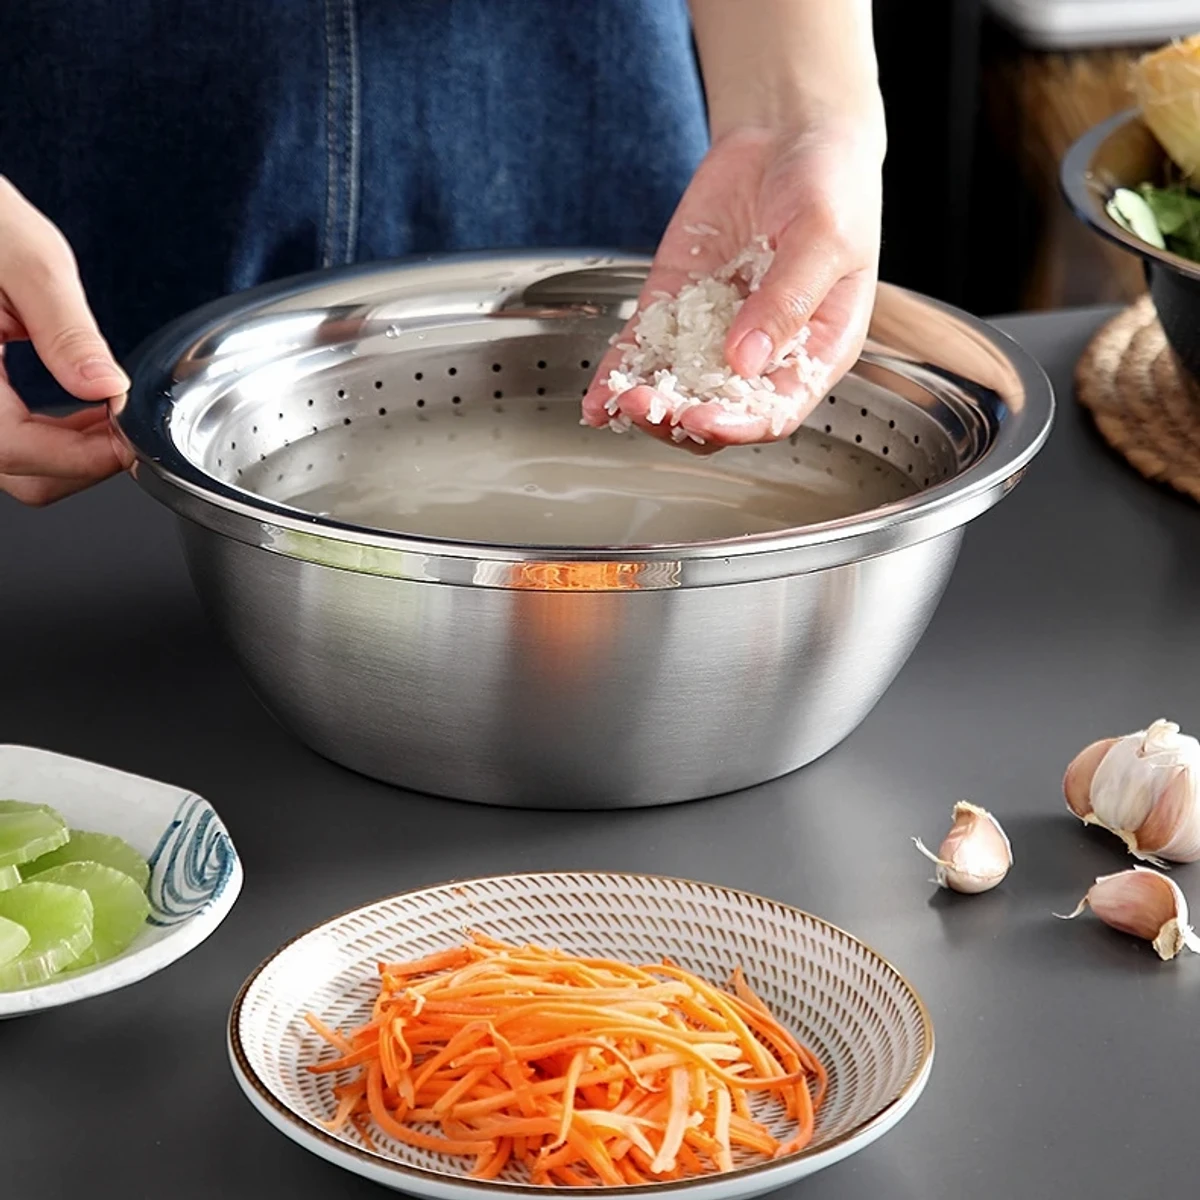 3 in 1 Vegetable Cutter with Drain Basket